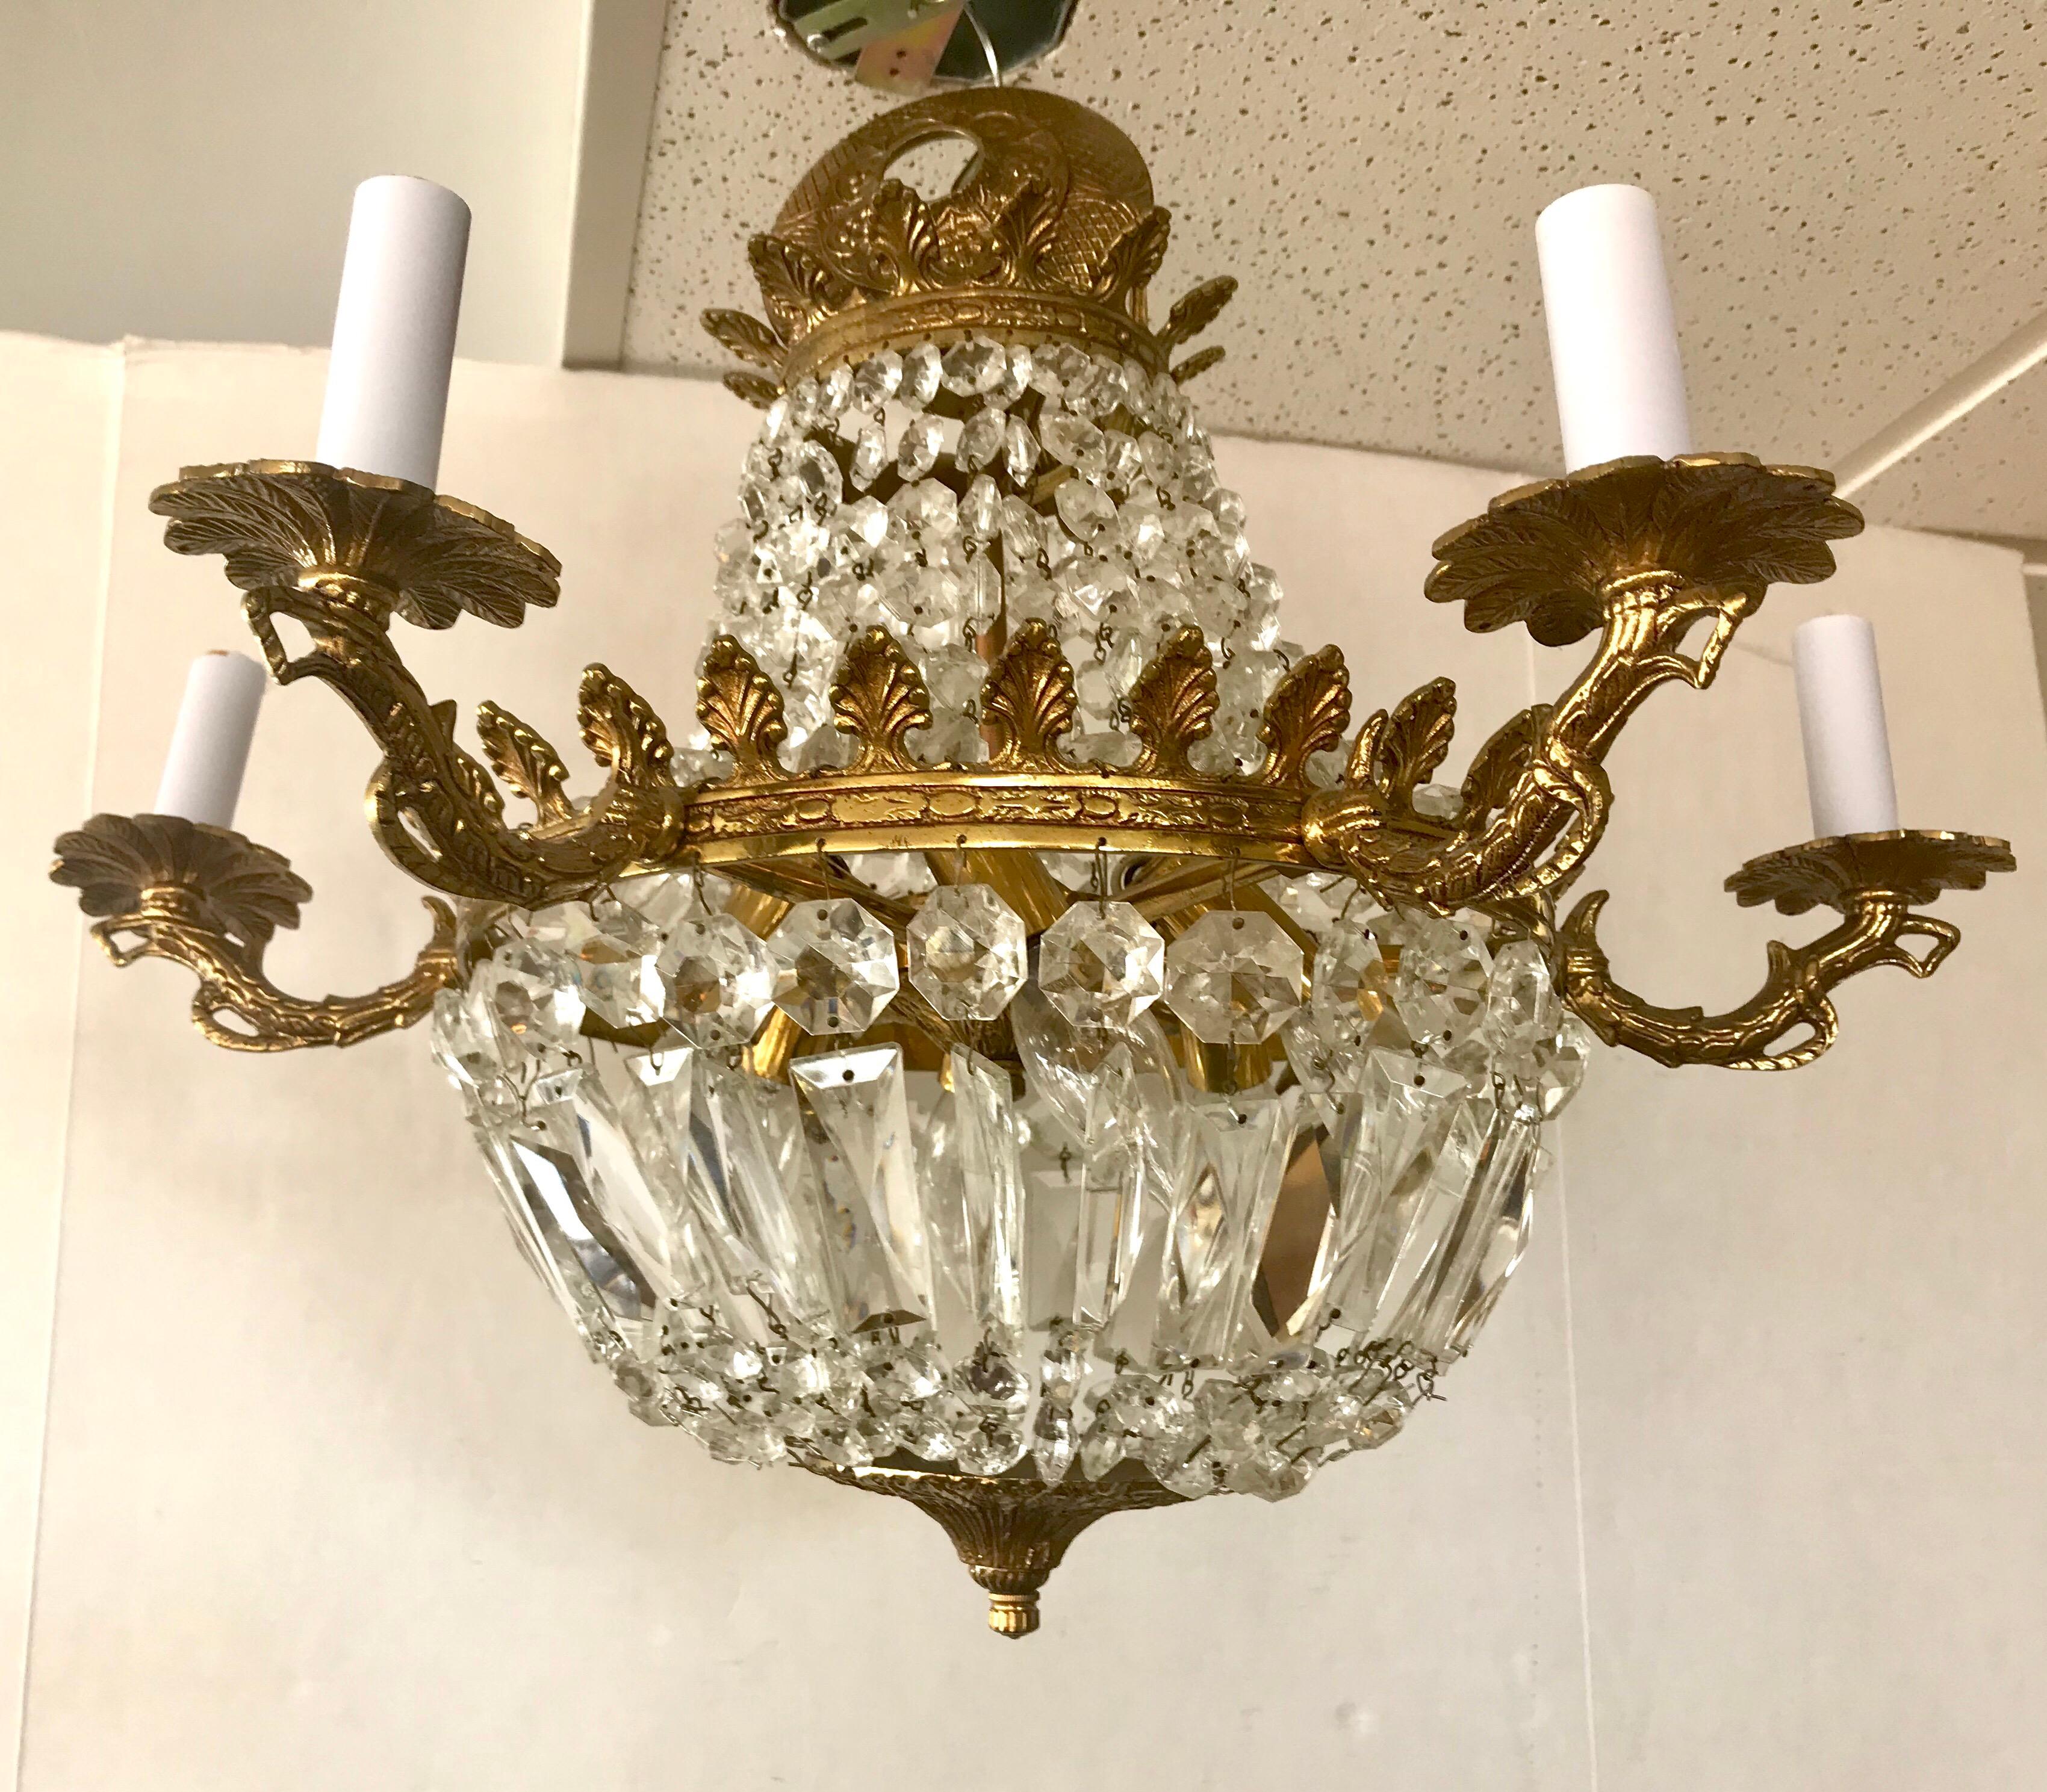 Stunning twelve-light bronze and crystal basket chandelier, circa 1950s. Wired for USA and in great condition.